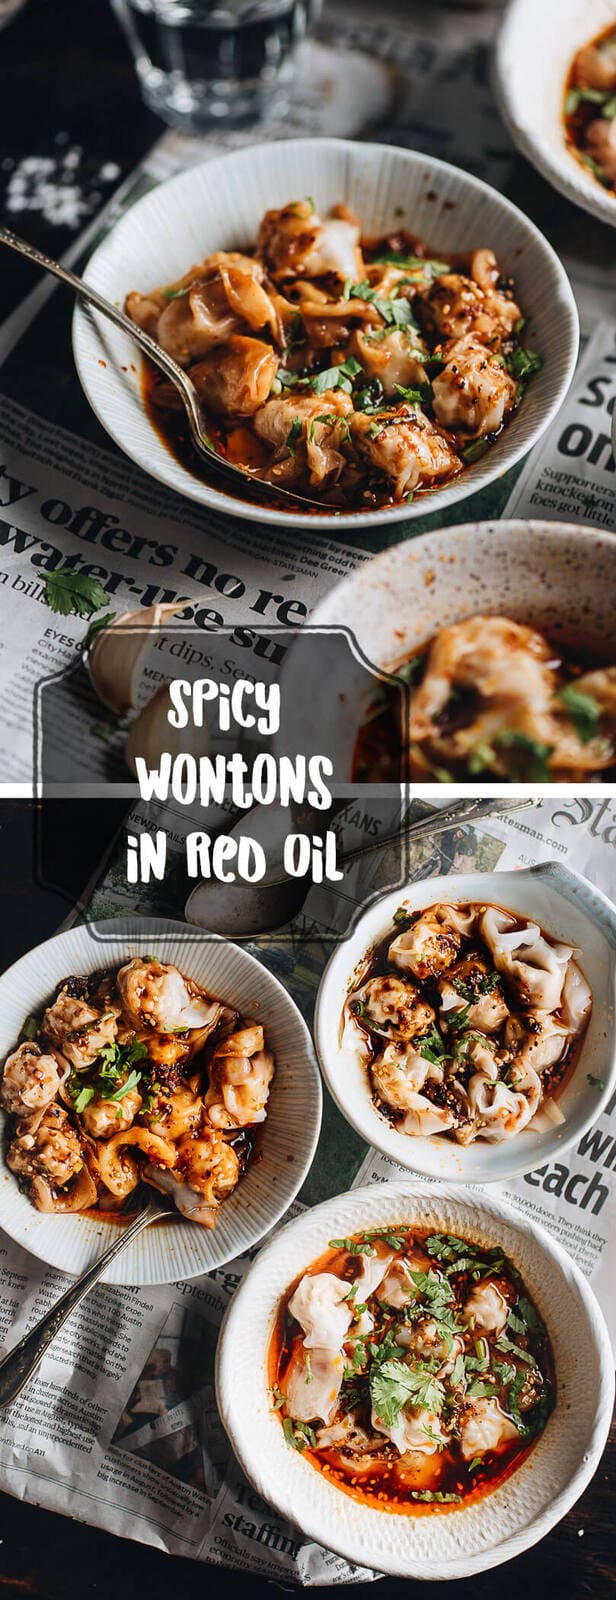 Sichuan Spicy Wontons in Red Oil (红油抄手) - The real-deal recipe that yields the most scrumptious hot sauce with hearty wontons.